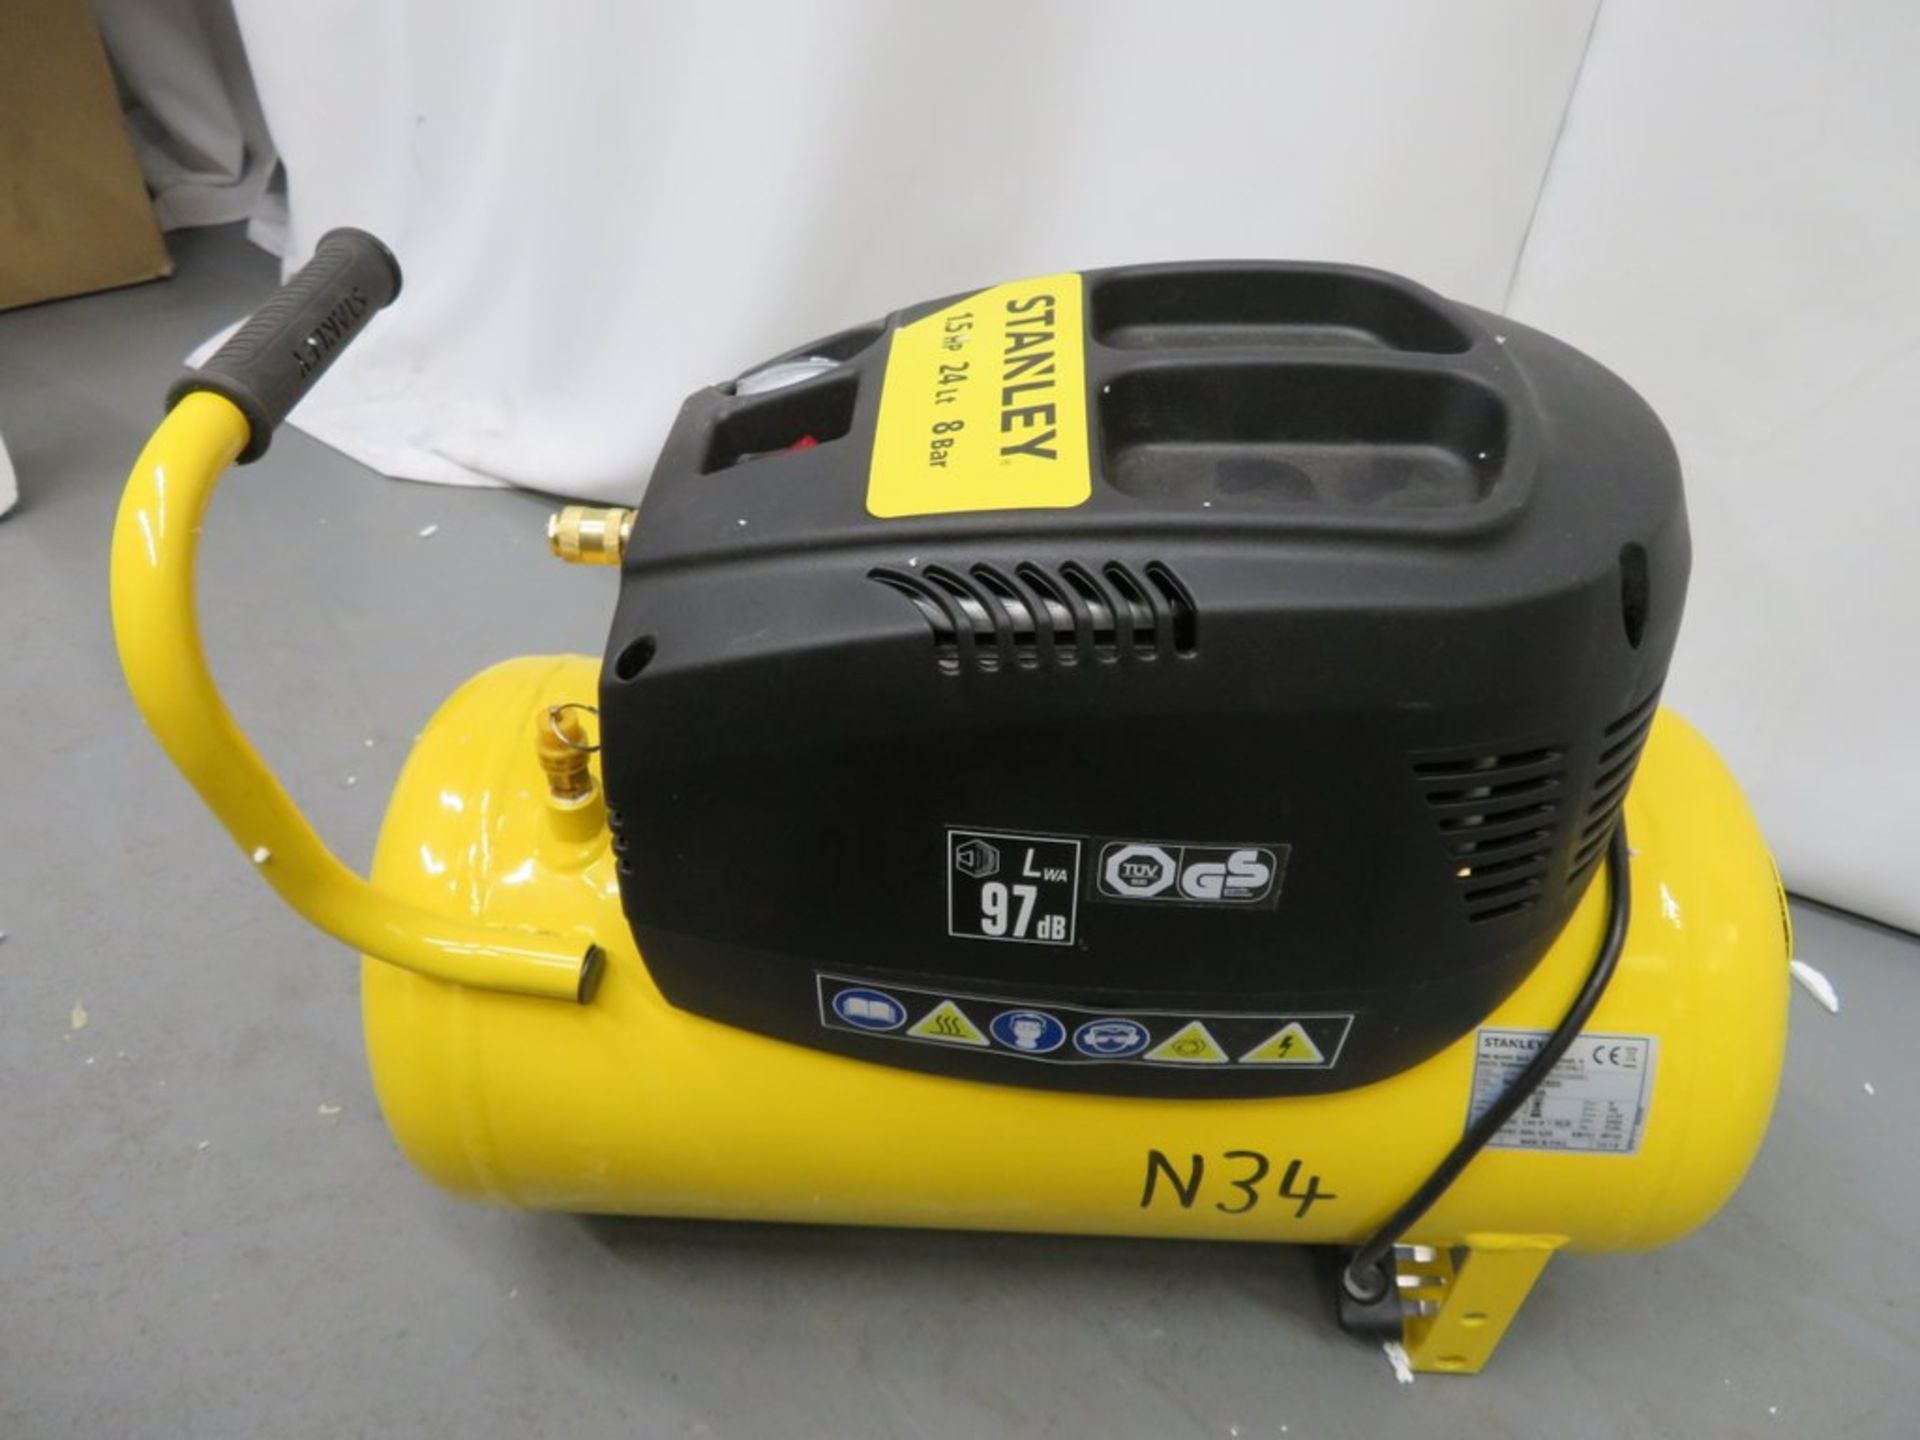 Stanley 24 Litre Electrical Air Compressor, With Accessories Kit. Model: 8216035SCR011. 230v. - Image 5 of 14